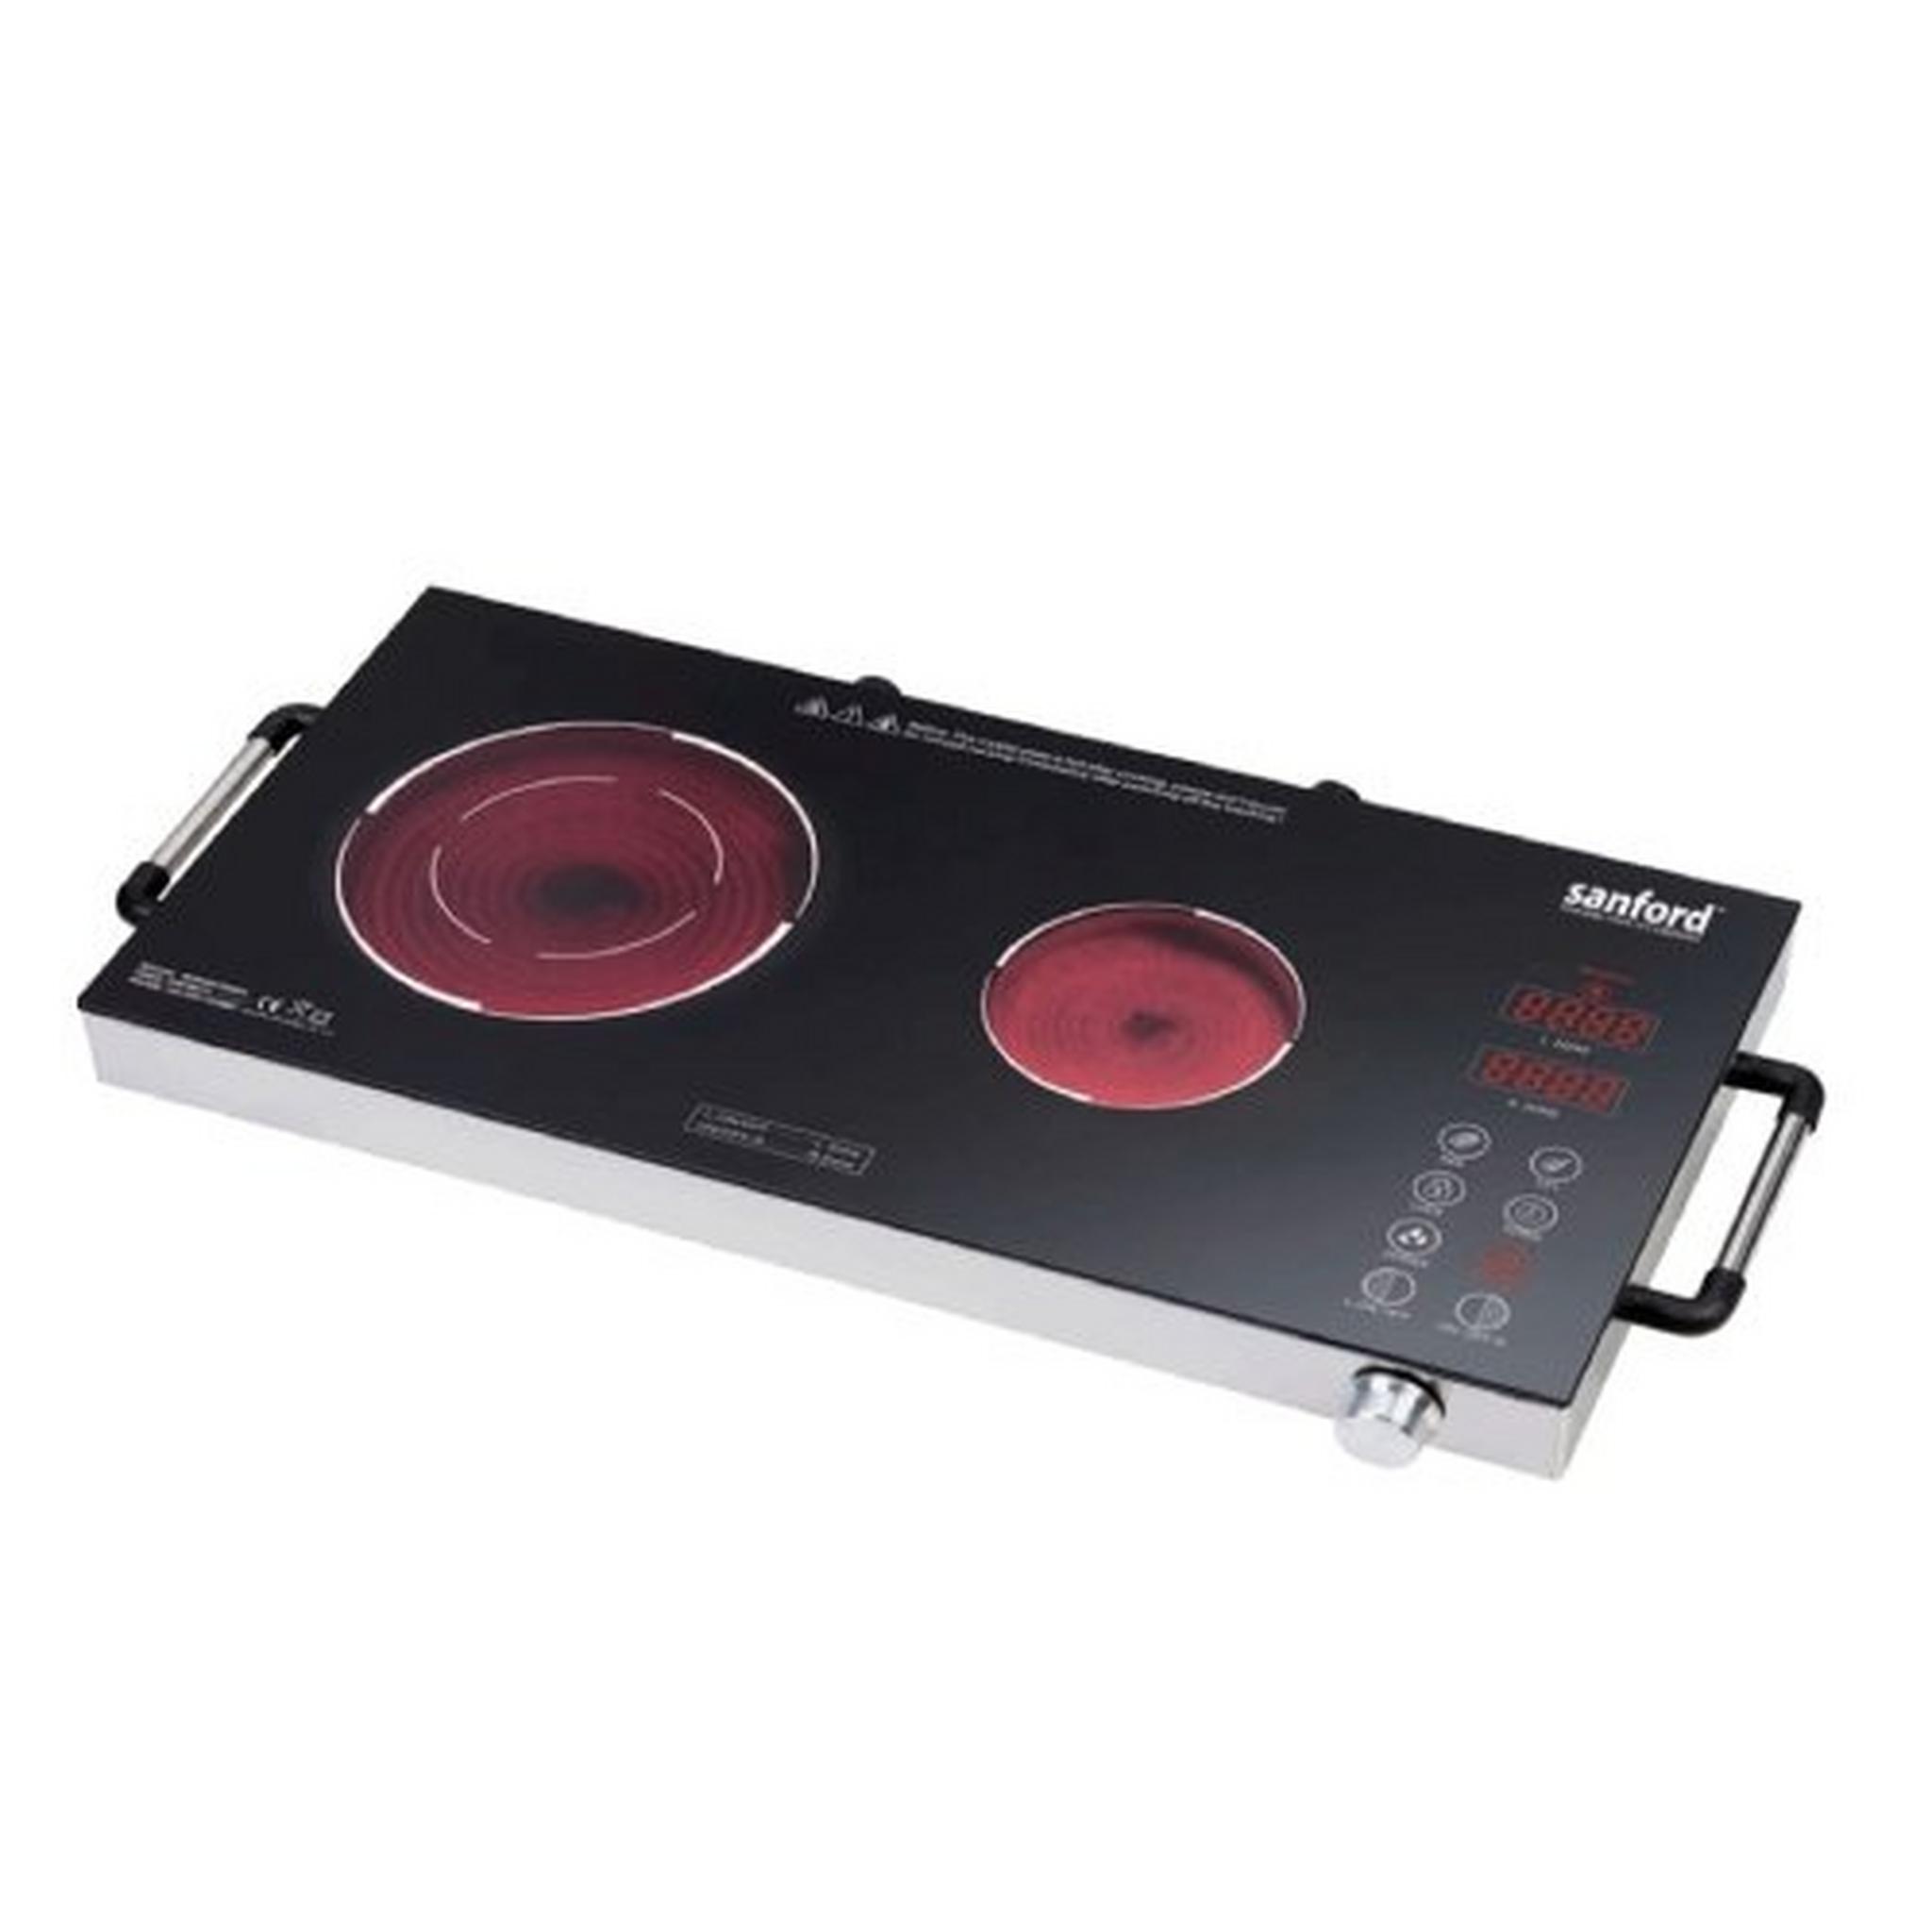 Sanford 2800W Double Cooker - SF5194IC